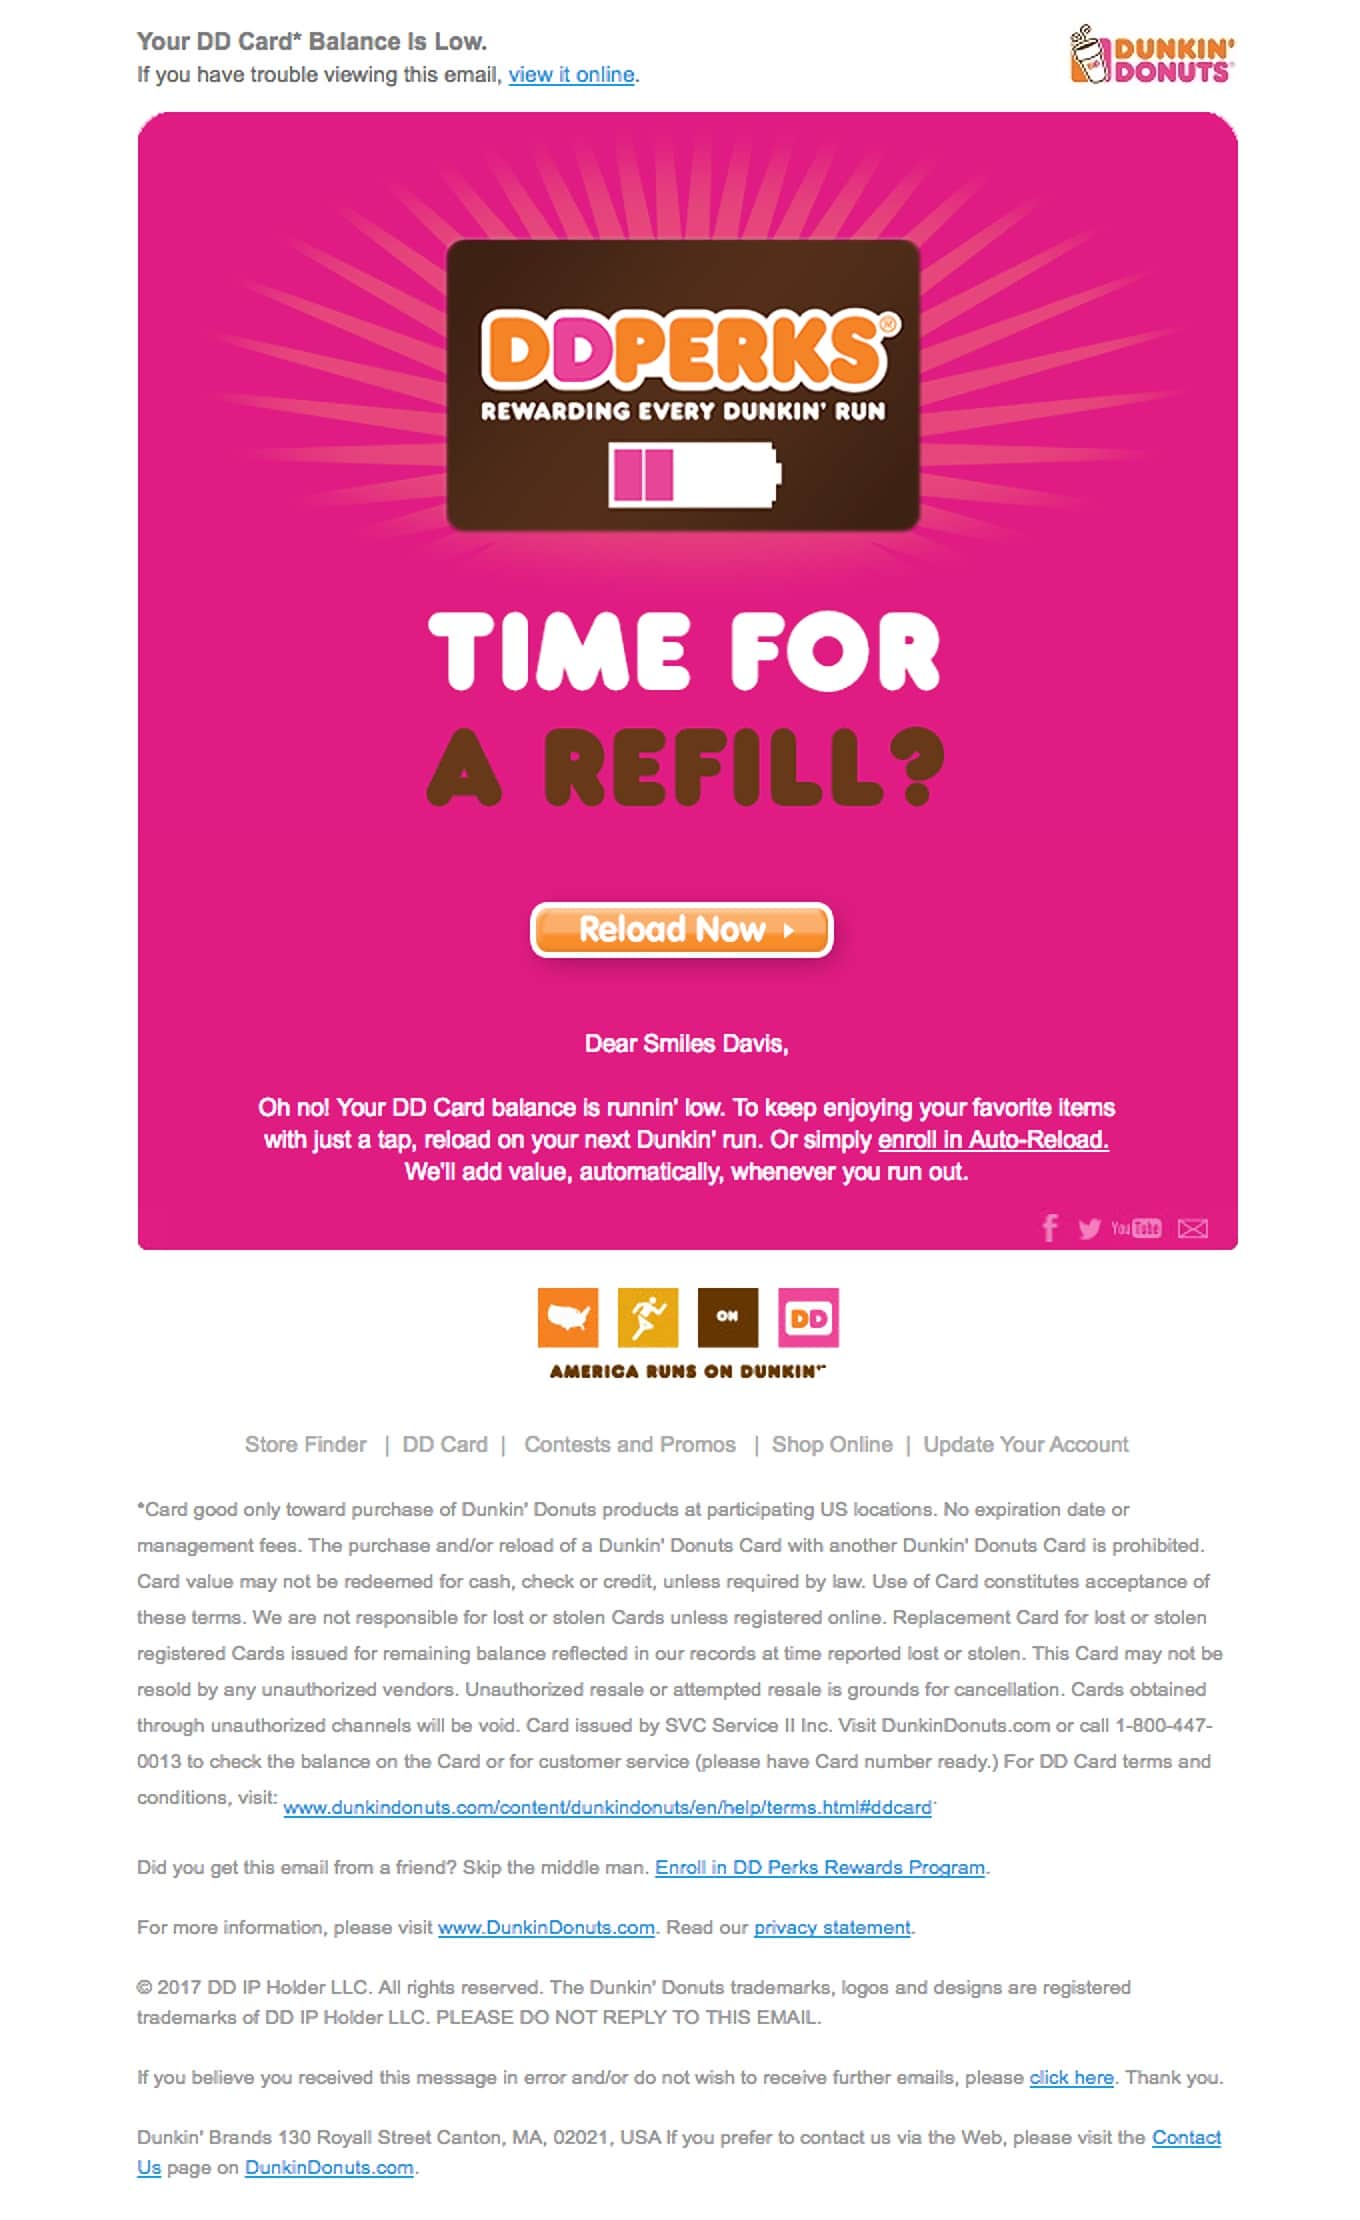 Dunkin’ Donuts transactional email